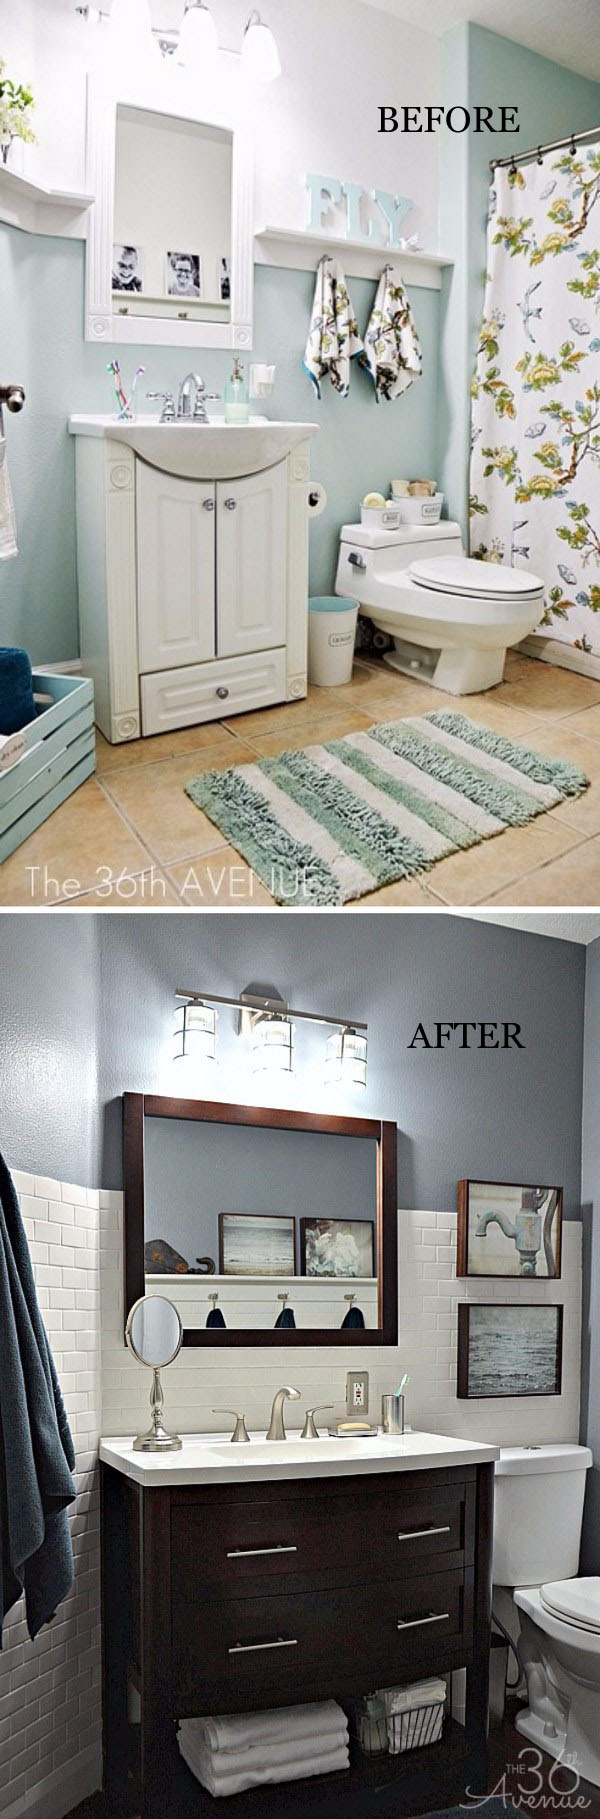 59-bathroom-remodel-before-and-after